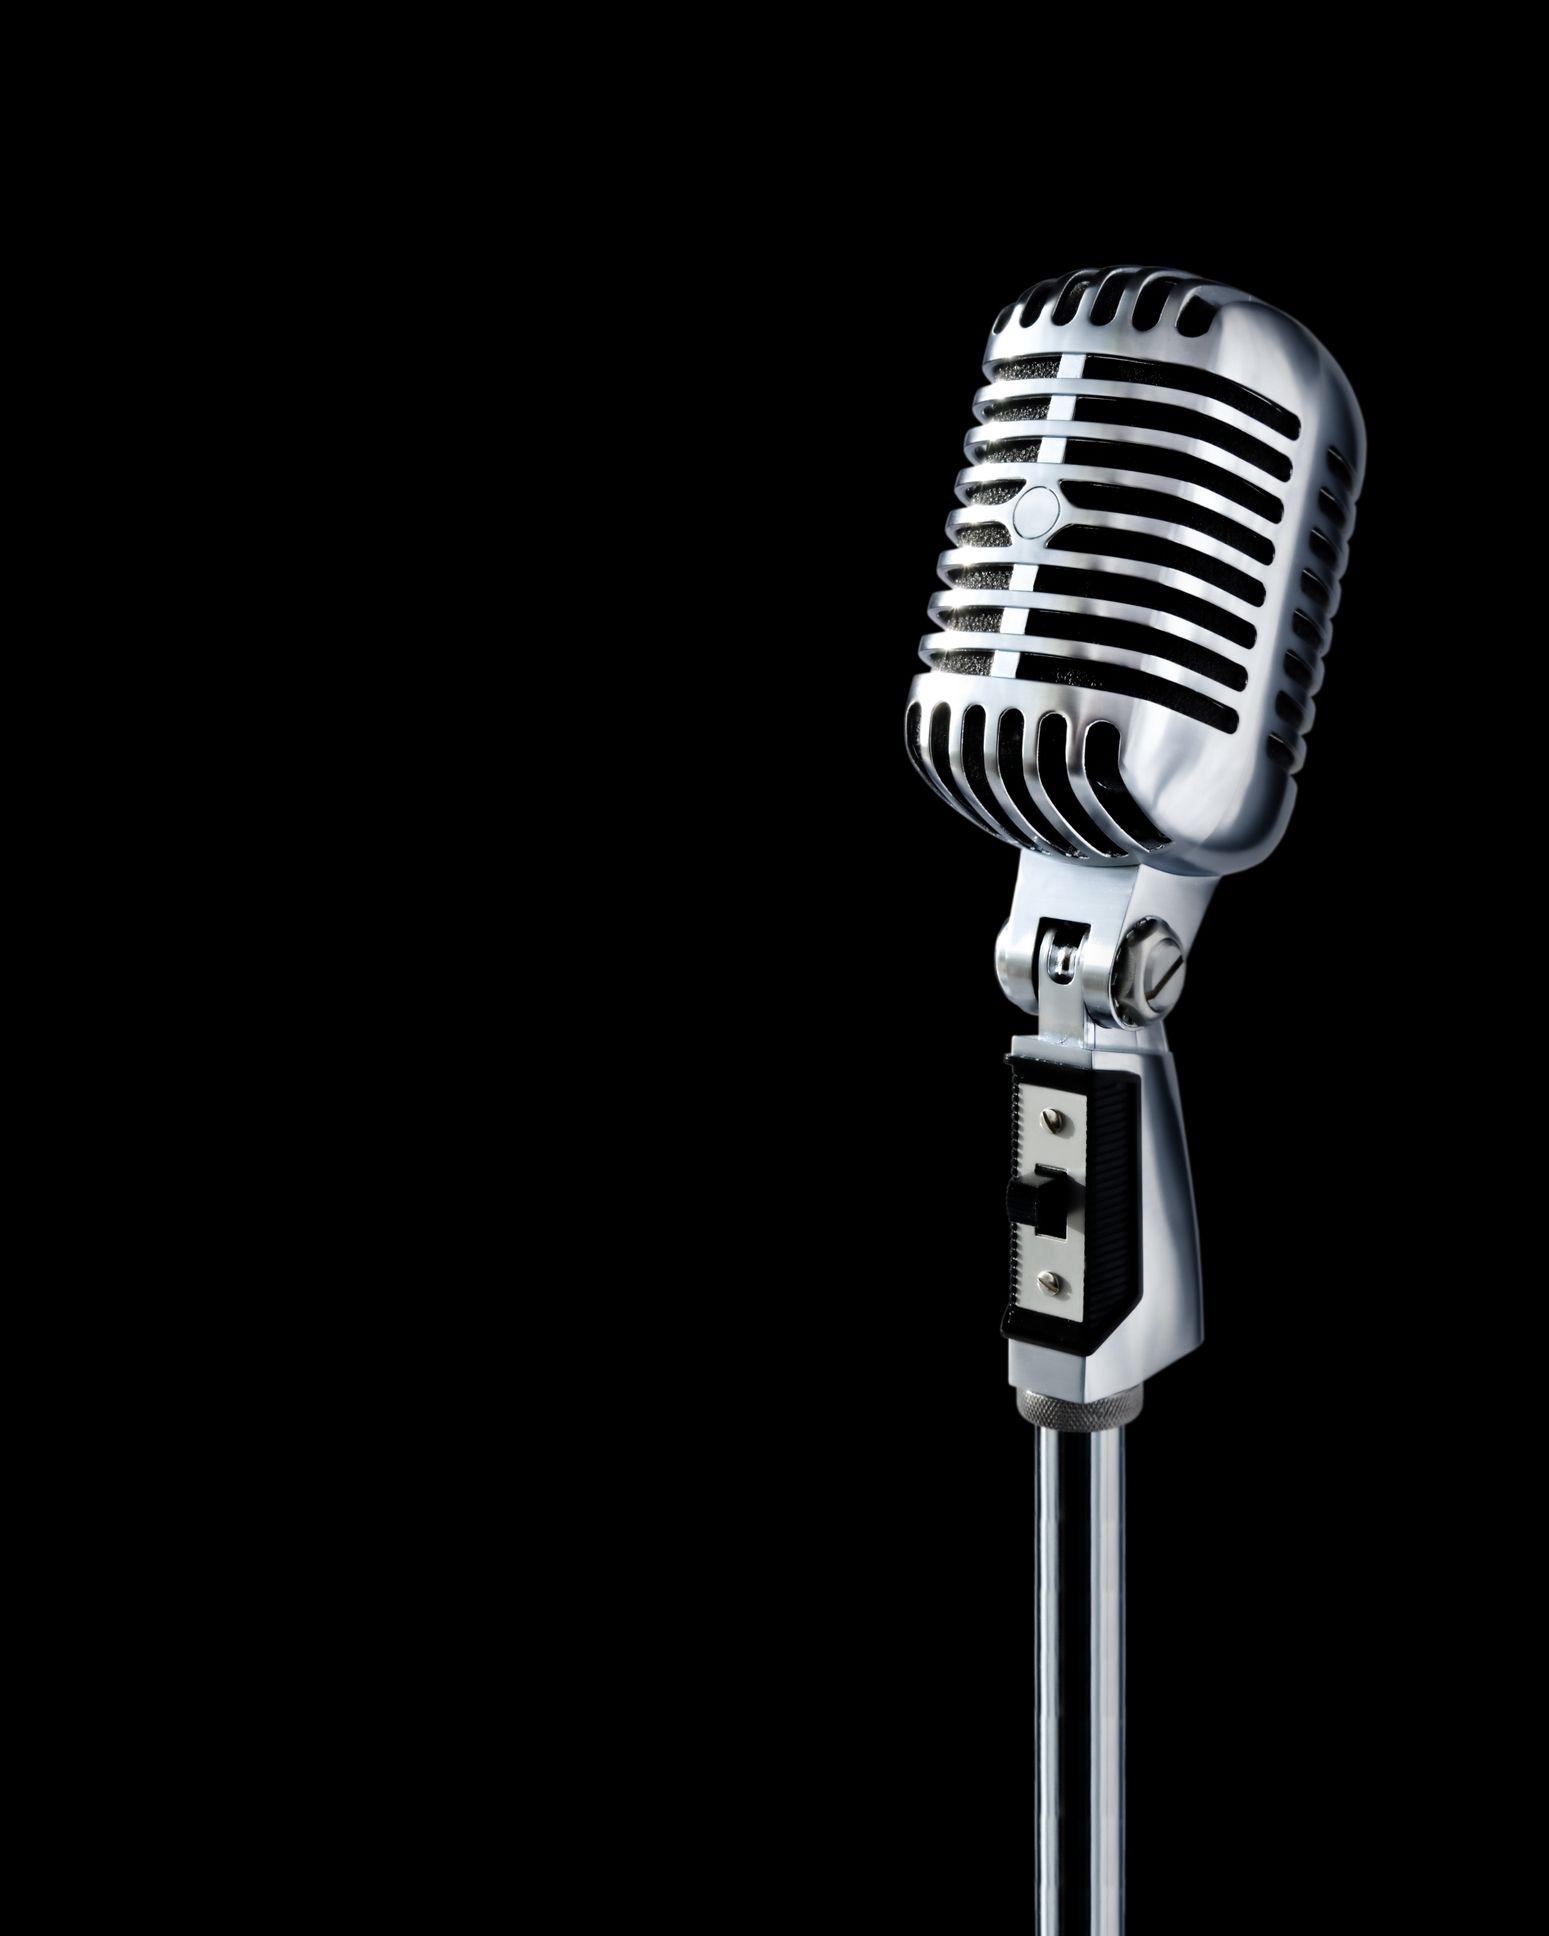 Microphone Wallpaper, Fantastic Image of Microphone HD Quality